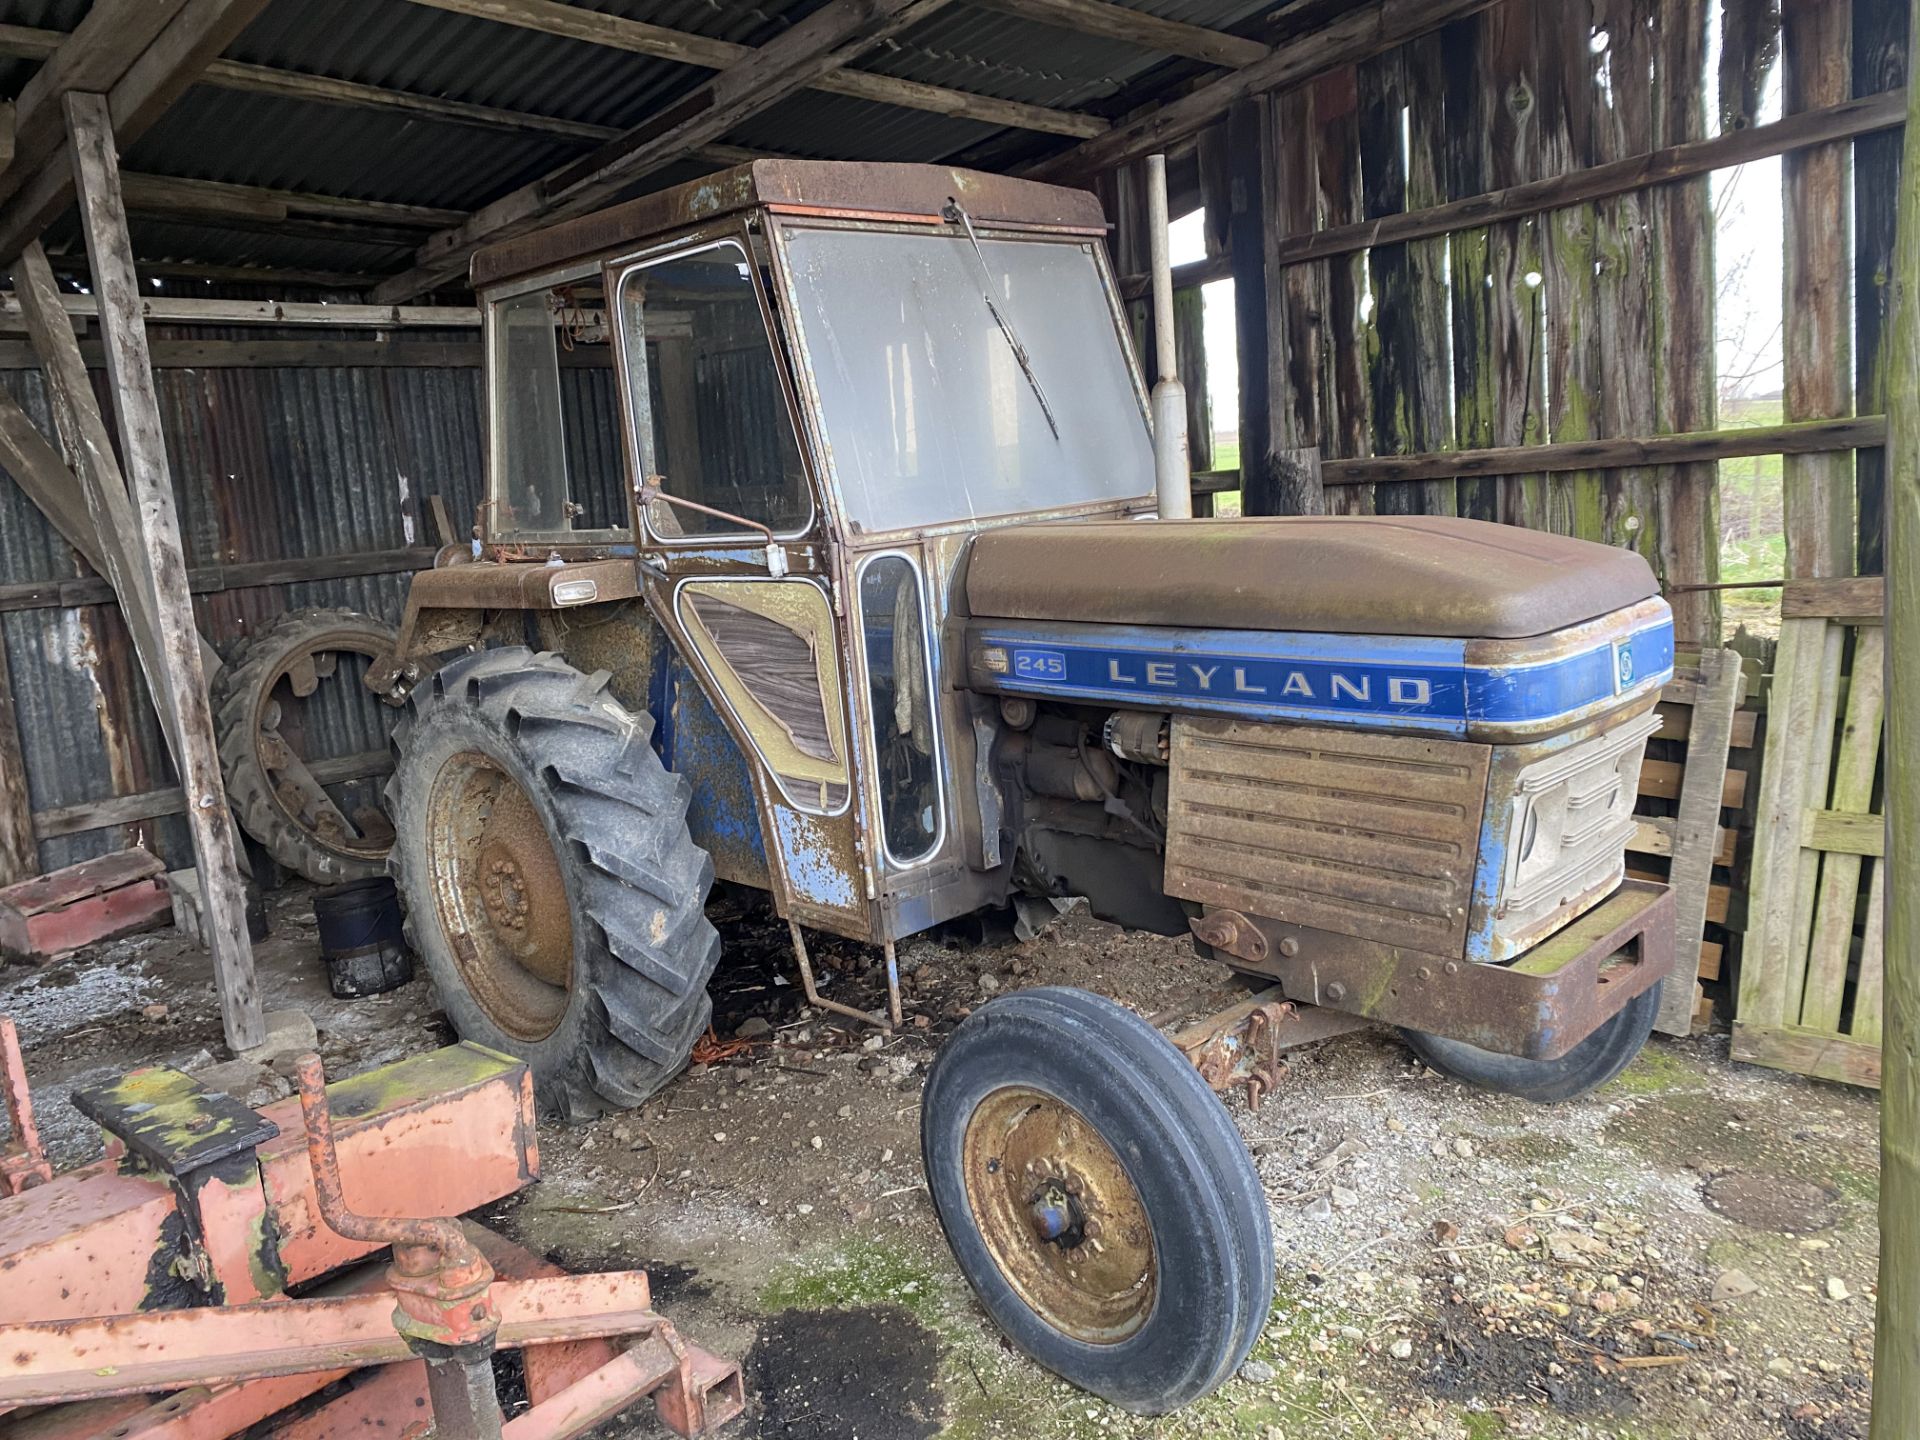 (75) Leyland 245 2wd tractor, 8,500 hrs, Reg KCT 534P, one owner from new, manual in office - Image 2 of 4